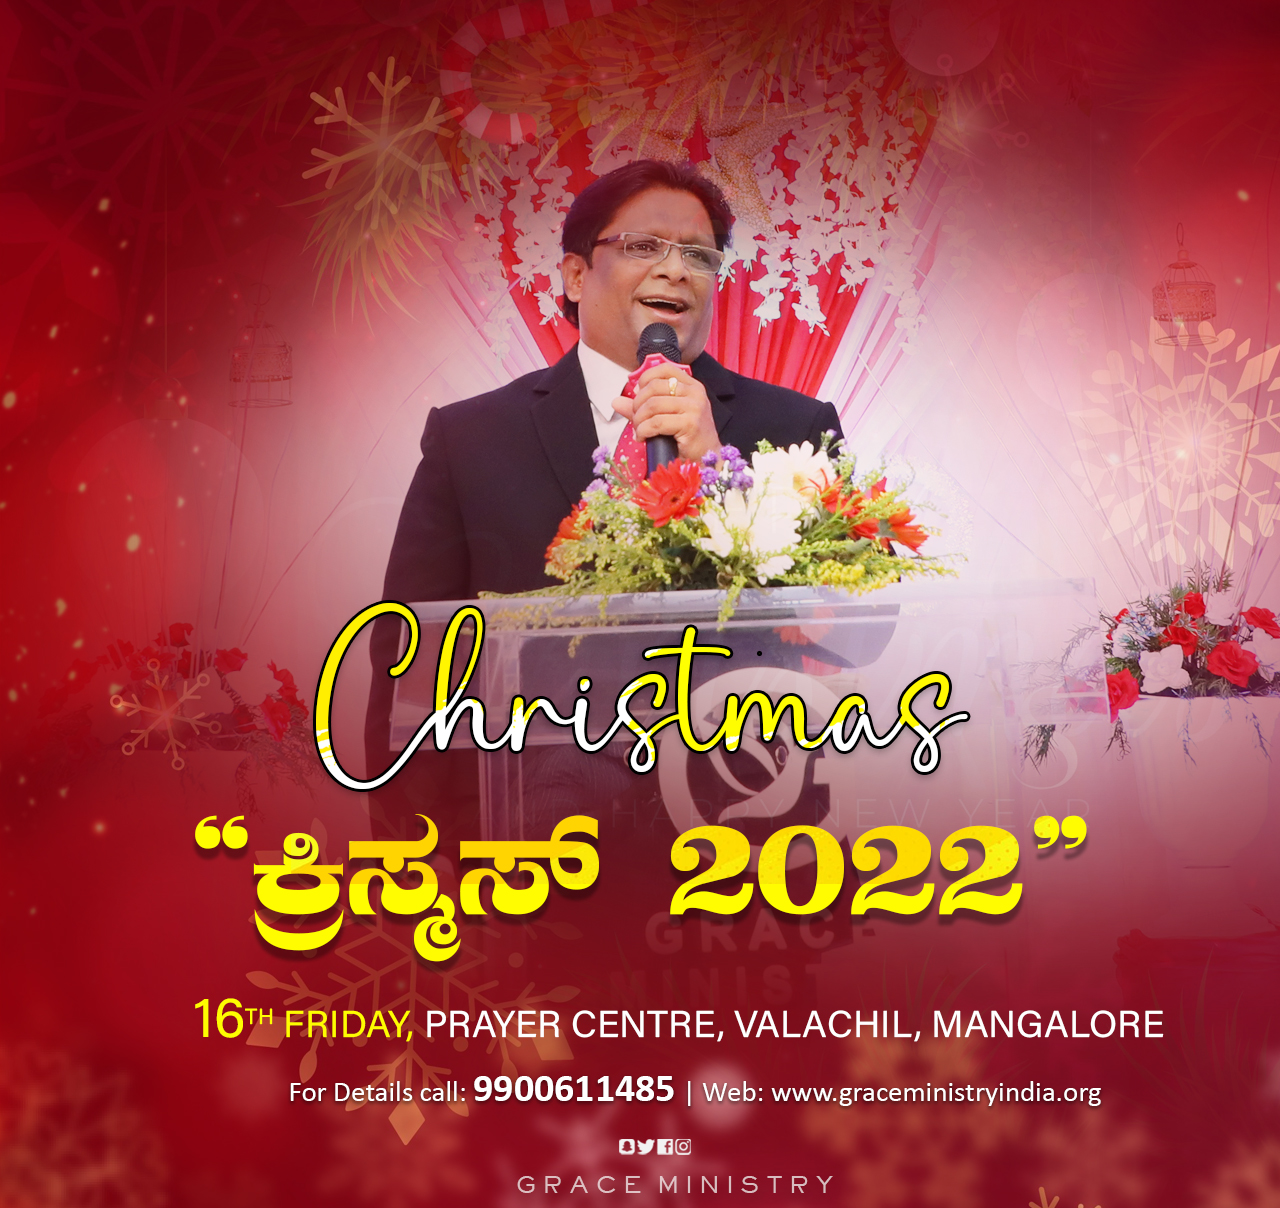 Join the Christmas Program 2022 of Grace Ministry on 16th December, Friday from 9:30 Am - 3:00 Pm at Grace Prayer Centre, Valachil in Mangalore. Together, let’s celebrate the message of Christmas.